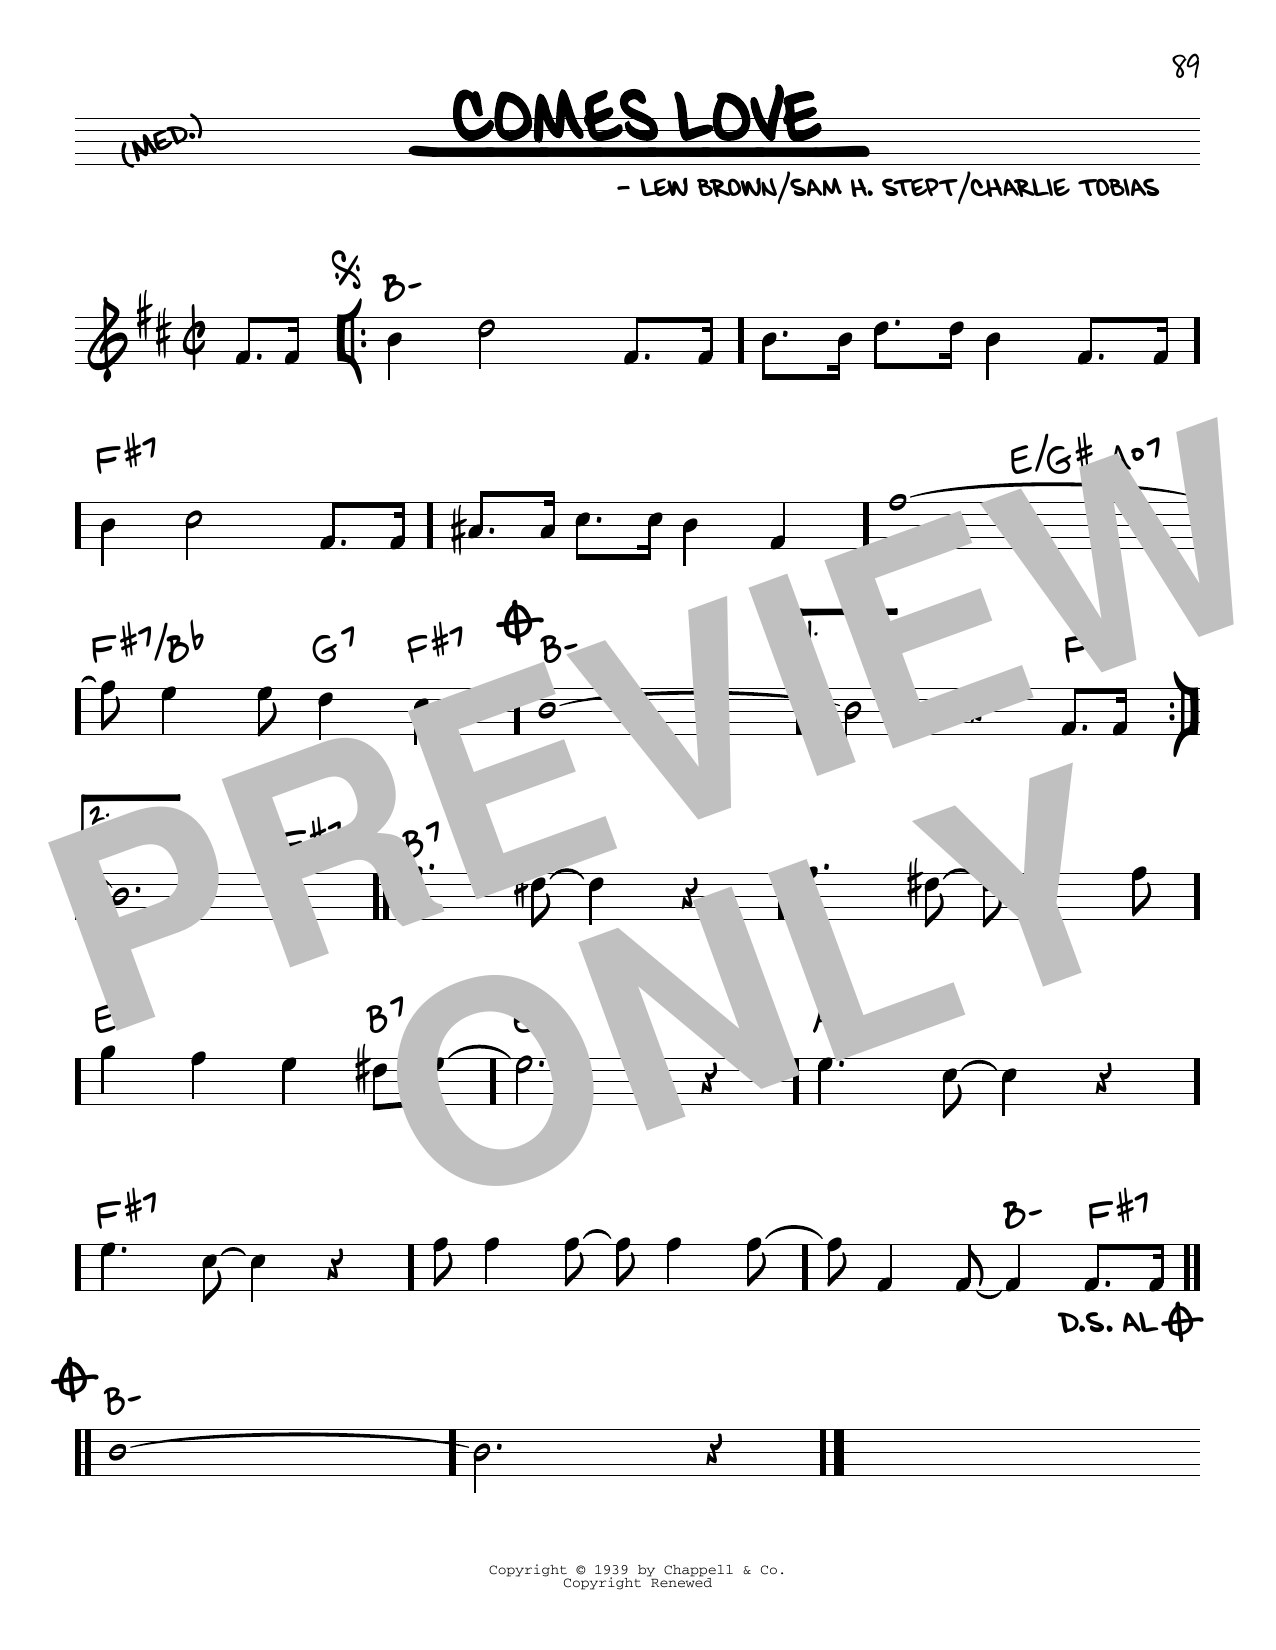 Download Lew Brown Comes Love Sheet Music